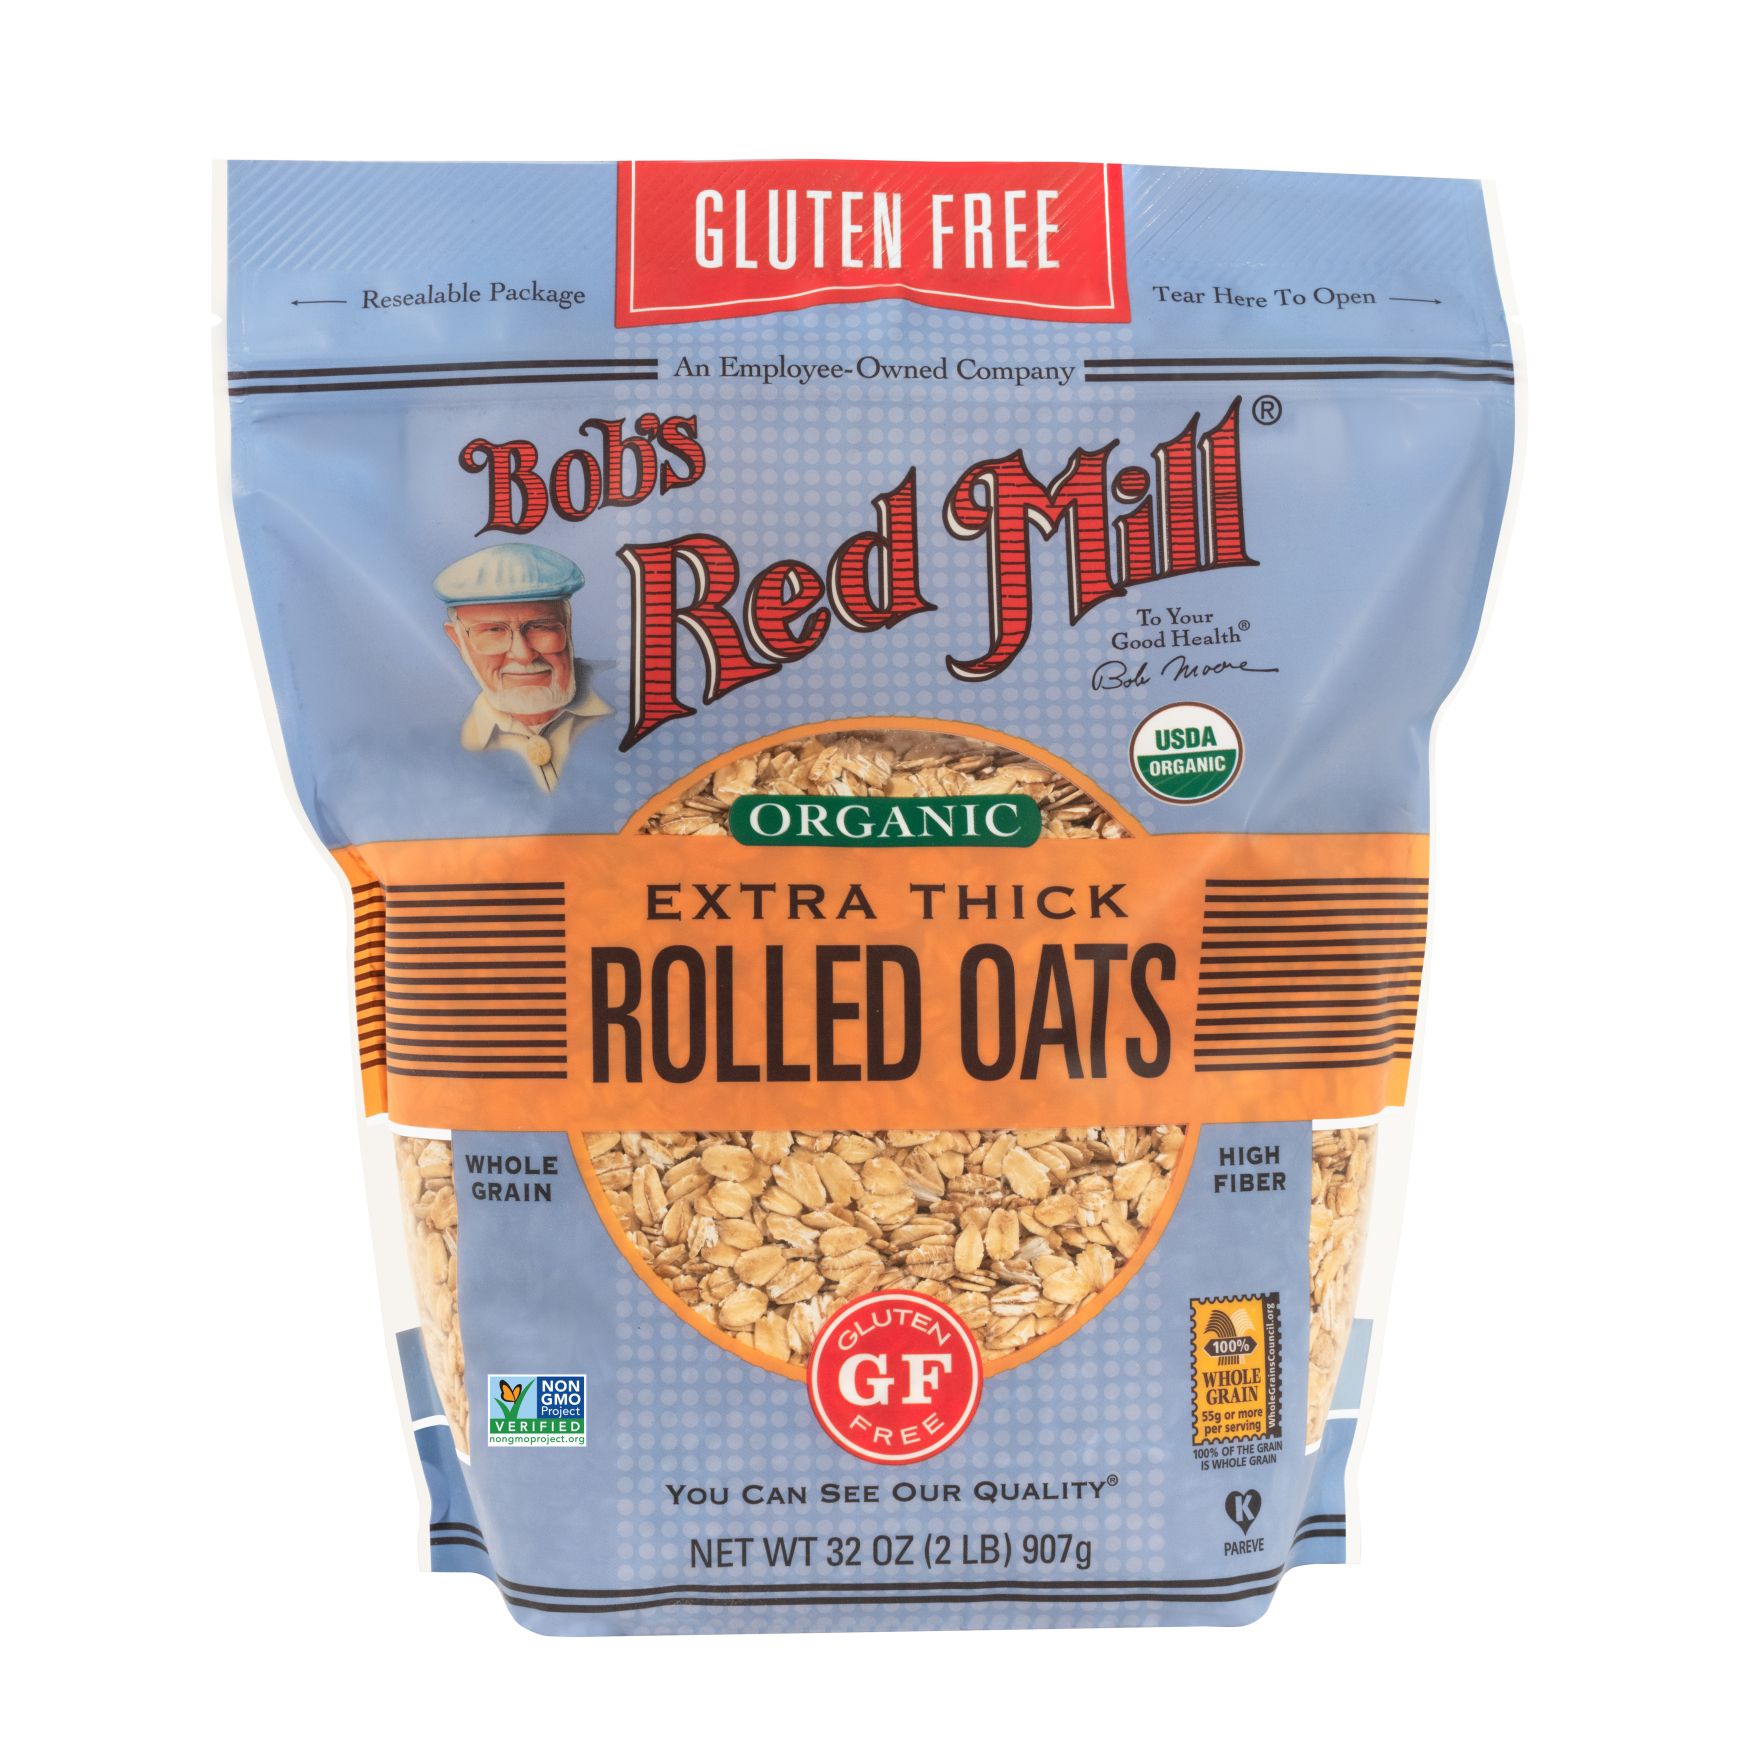 Gluten Free Organic Extra Thick Rolled Oats